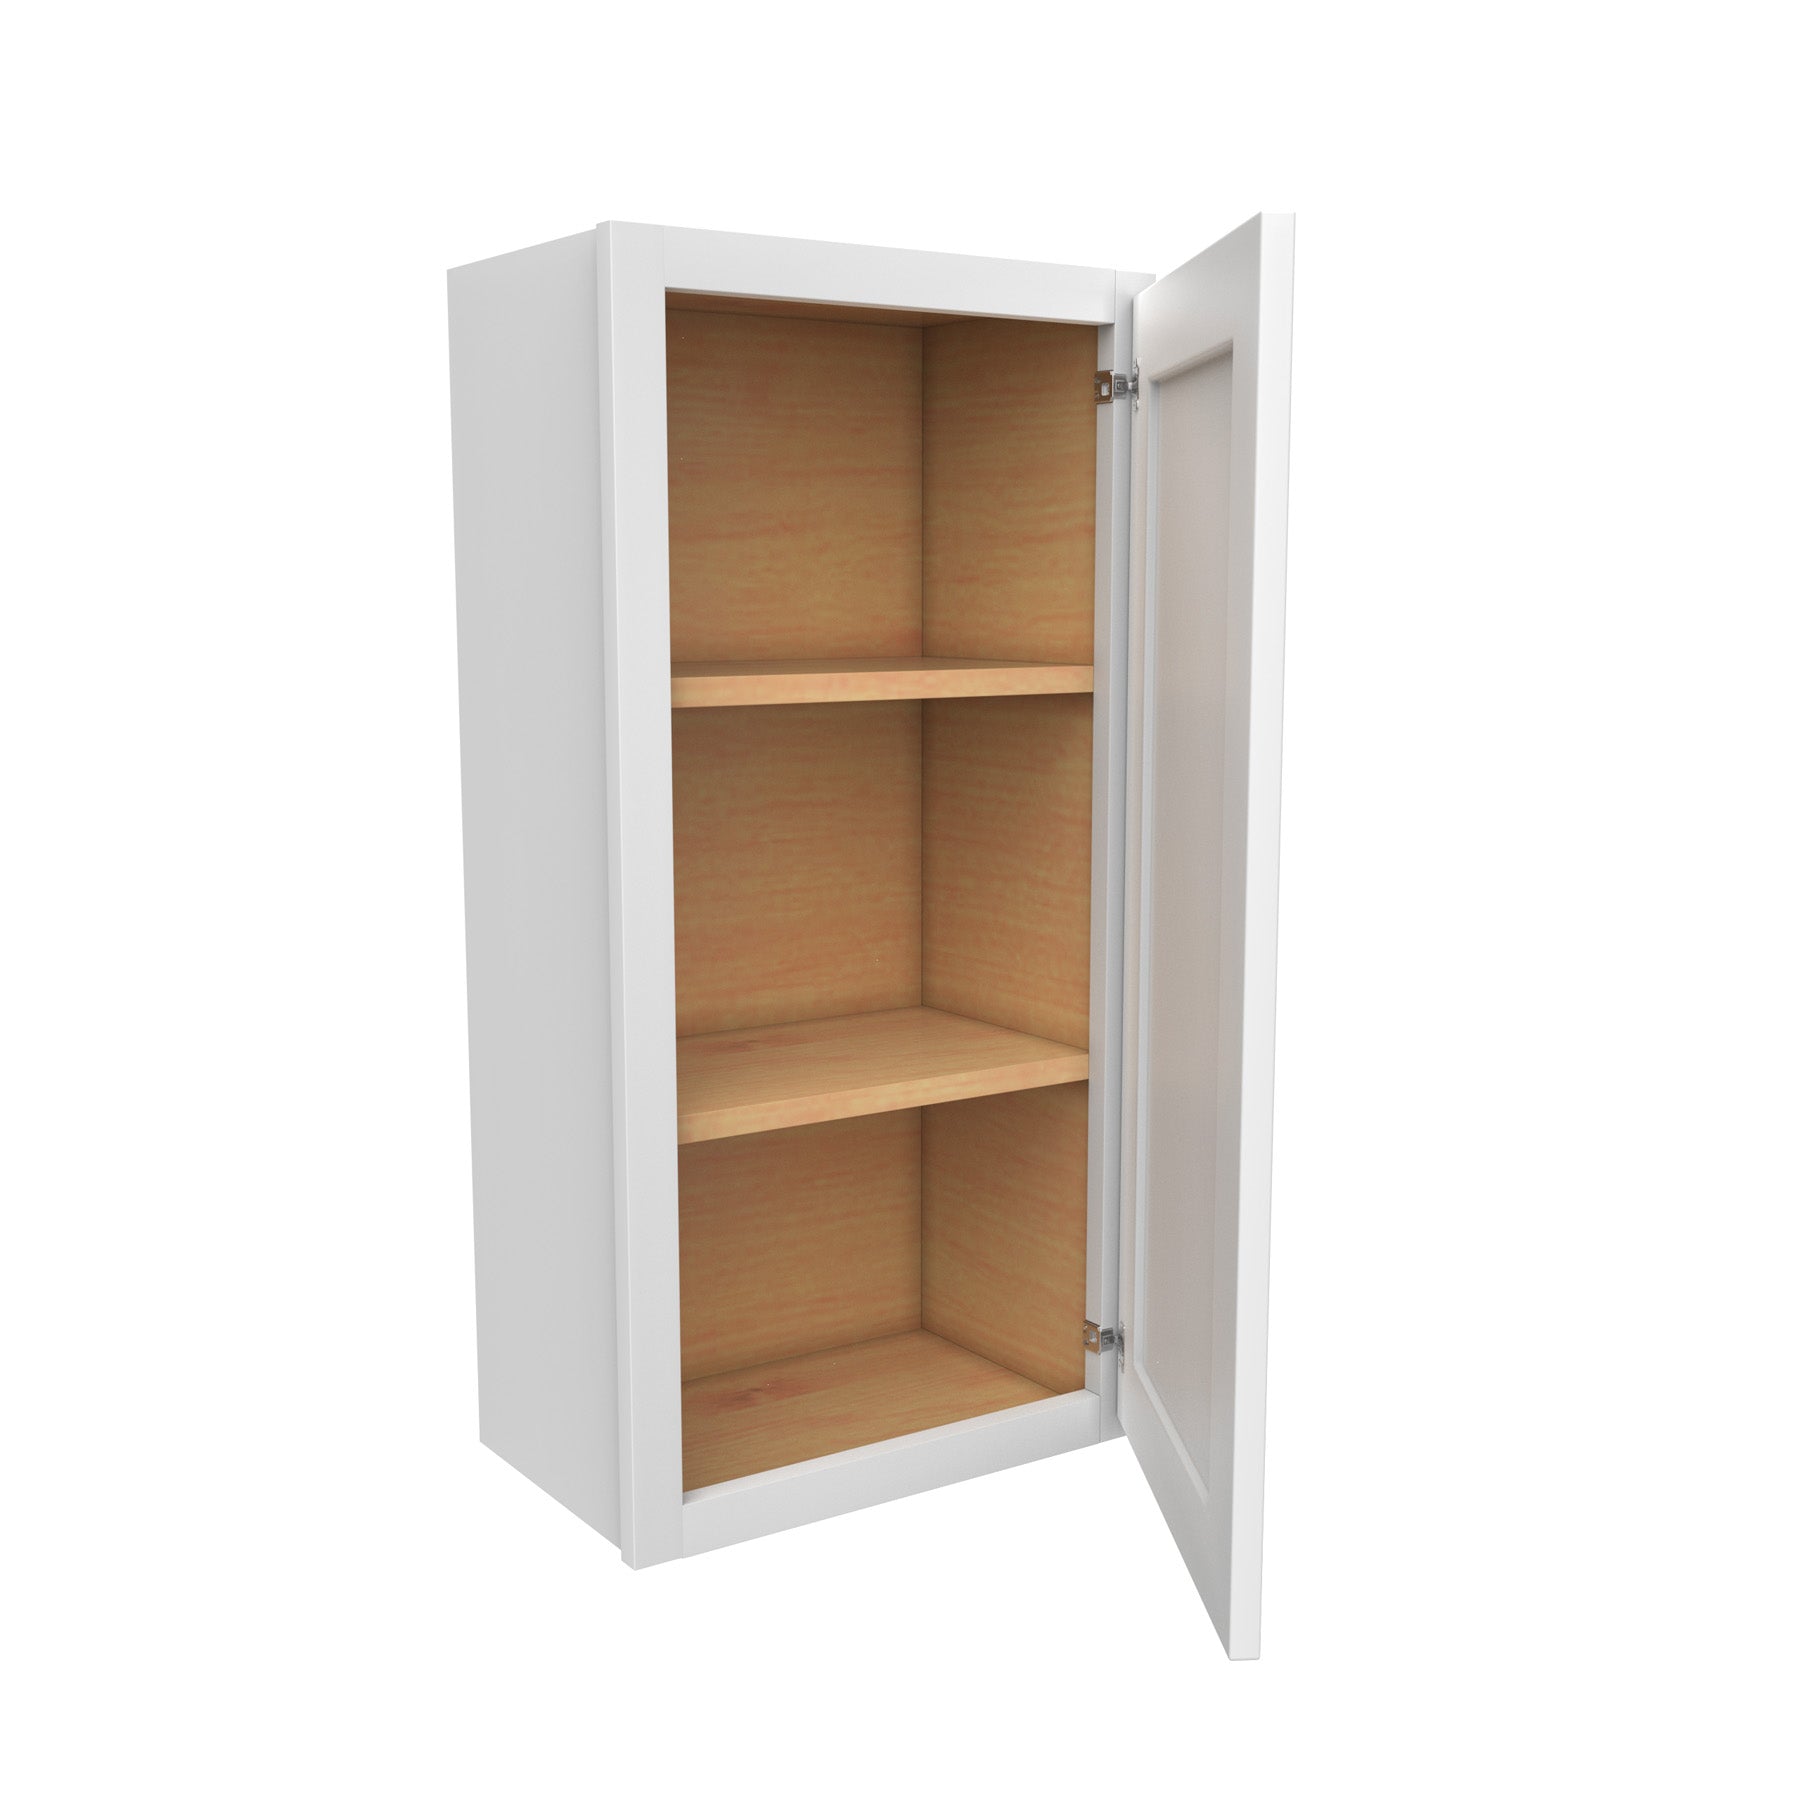 36 Inch High Single Door Wall Cabinet - Luxor White Shaker - Ready To Assemble, 18"W x 36"H x 12"D